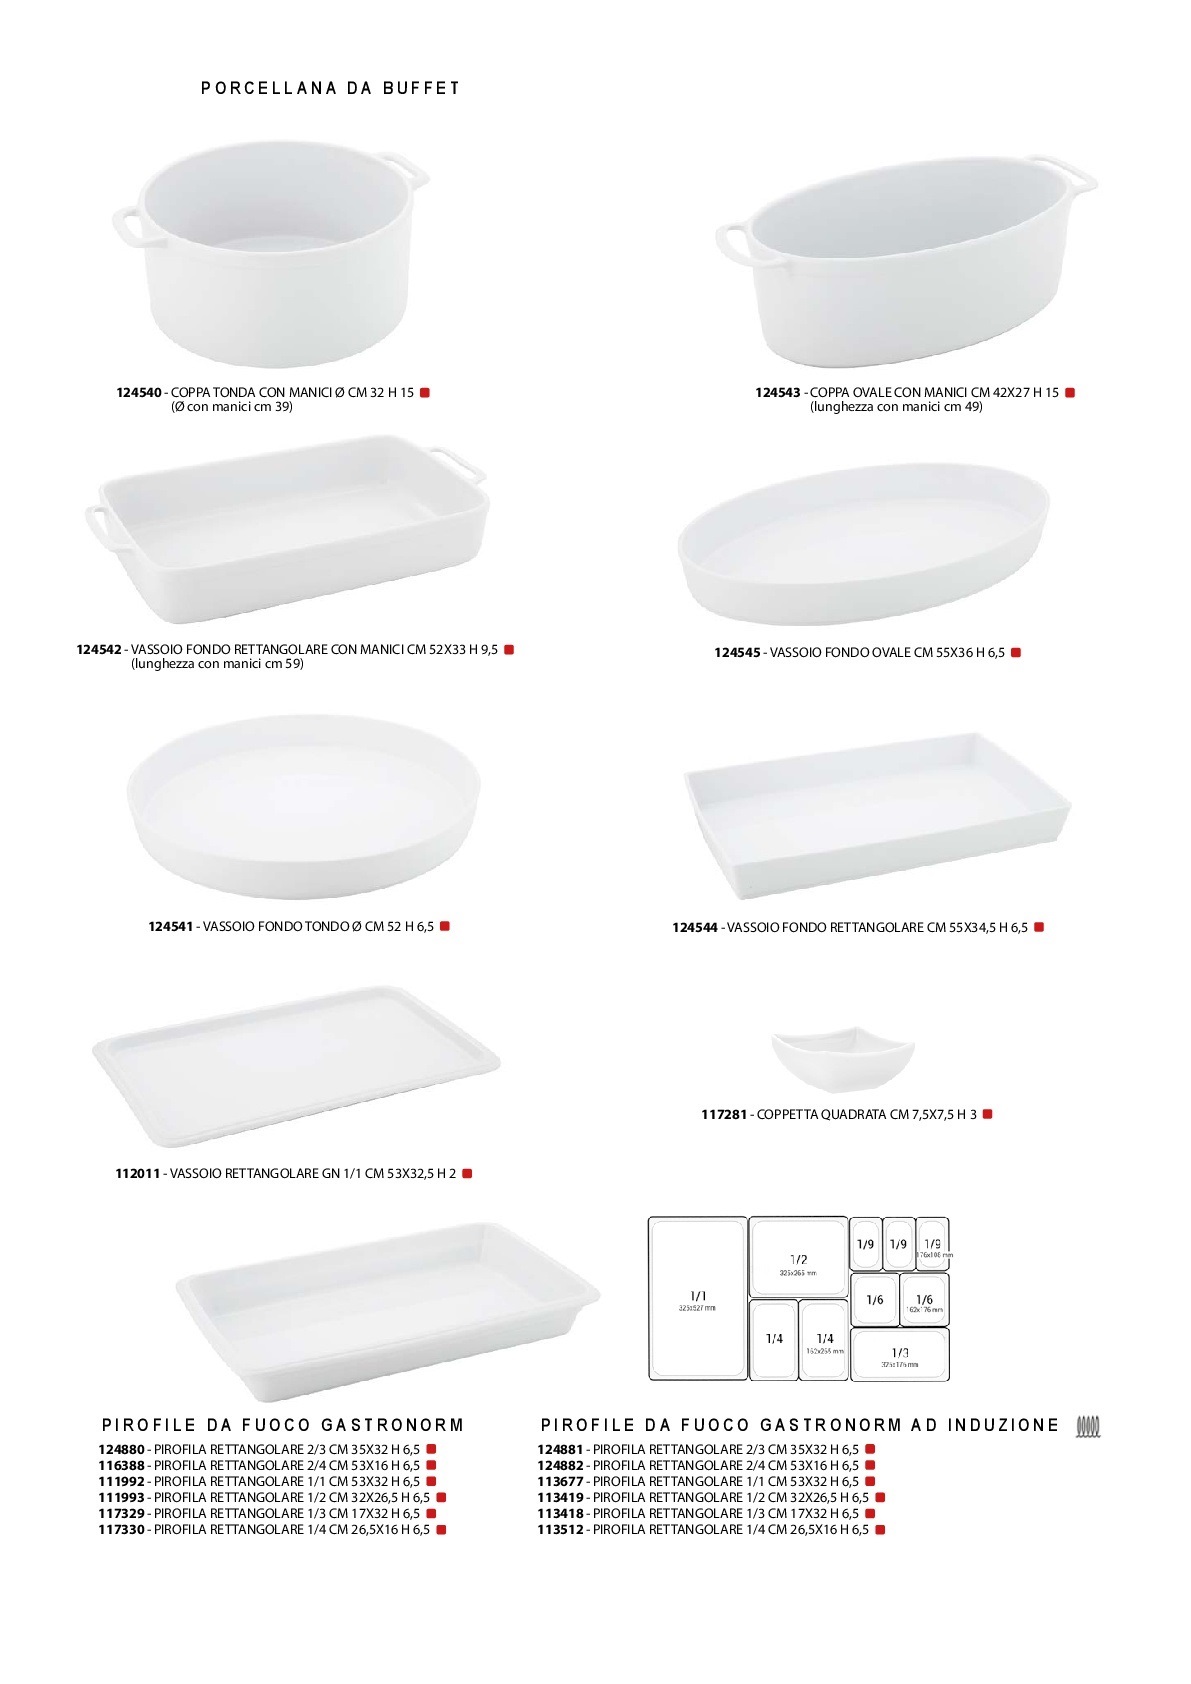 Buffet Porcelain Selected by Newformsdesign